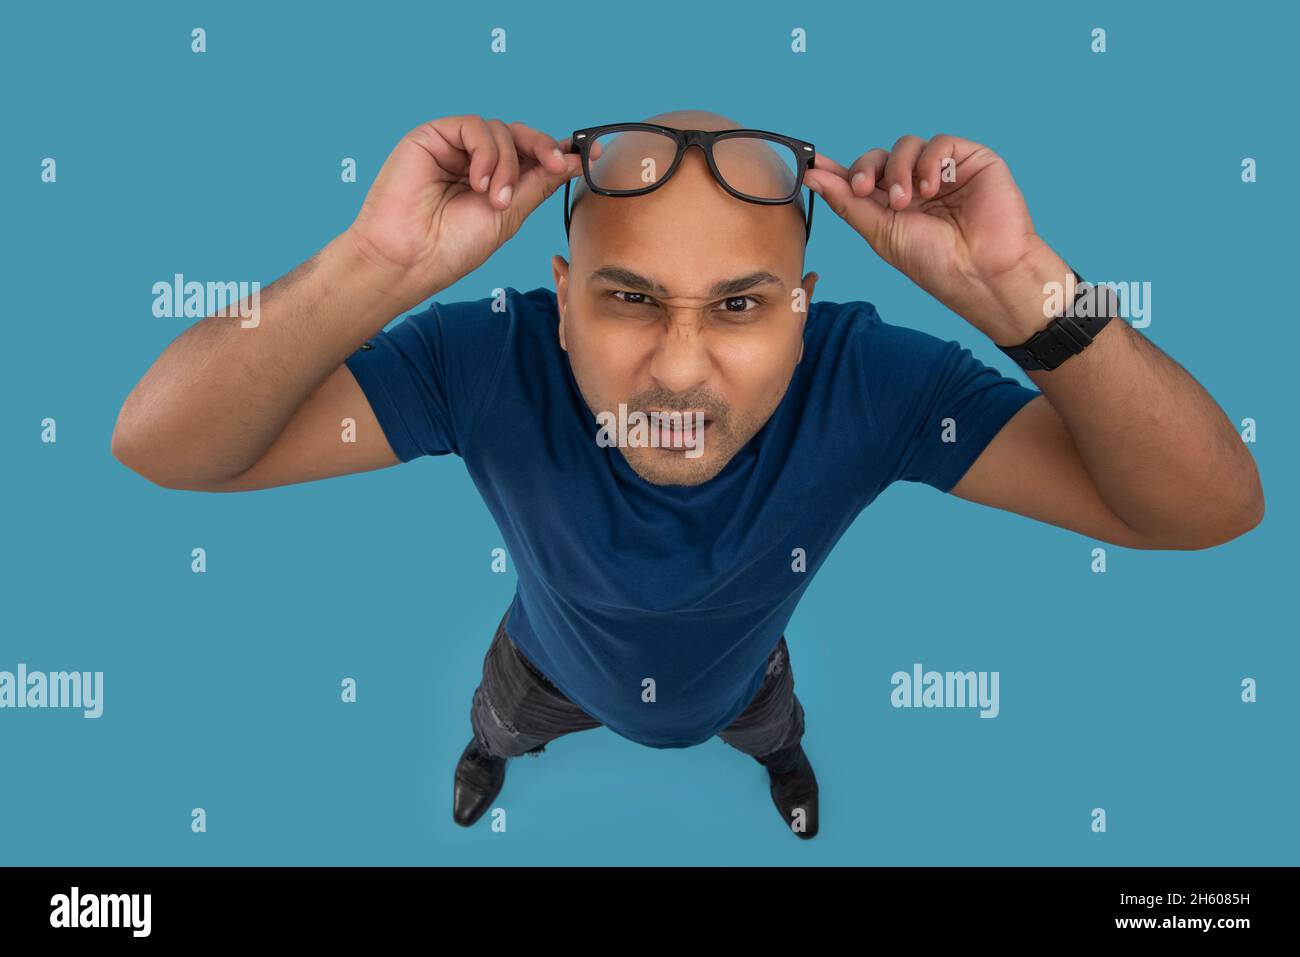 Portrait of a  bald man with confused expression lifting his eyeglasses up to his shaved head. Stock Photo